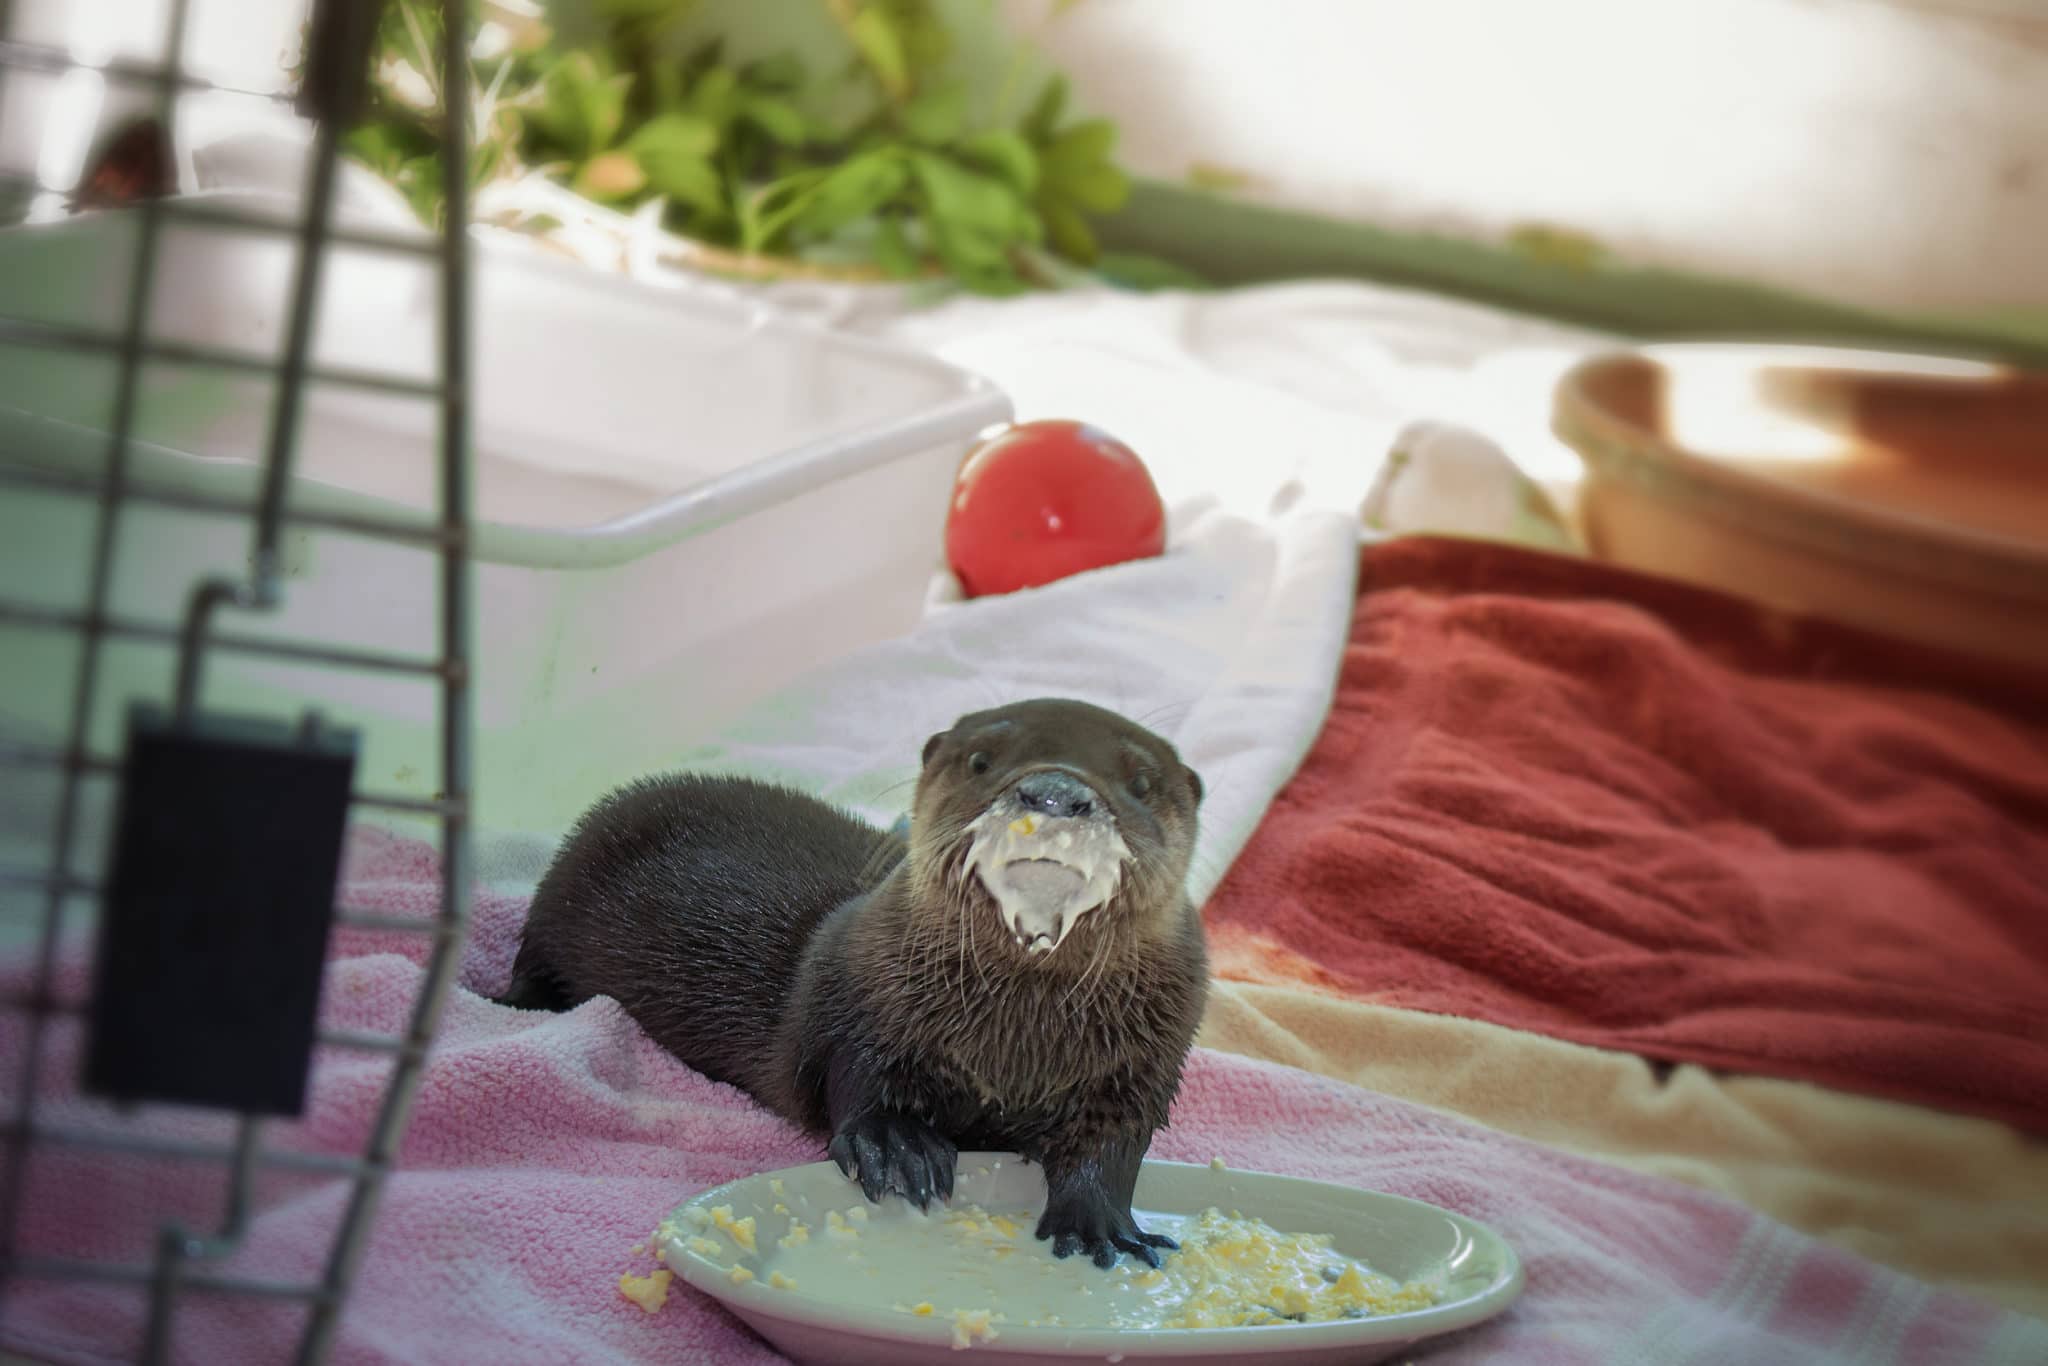 Baby otter in the wildlife hospital eating a plate of scrambled eggs and fish